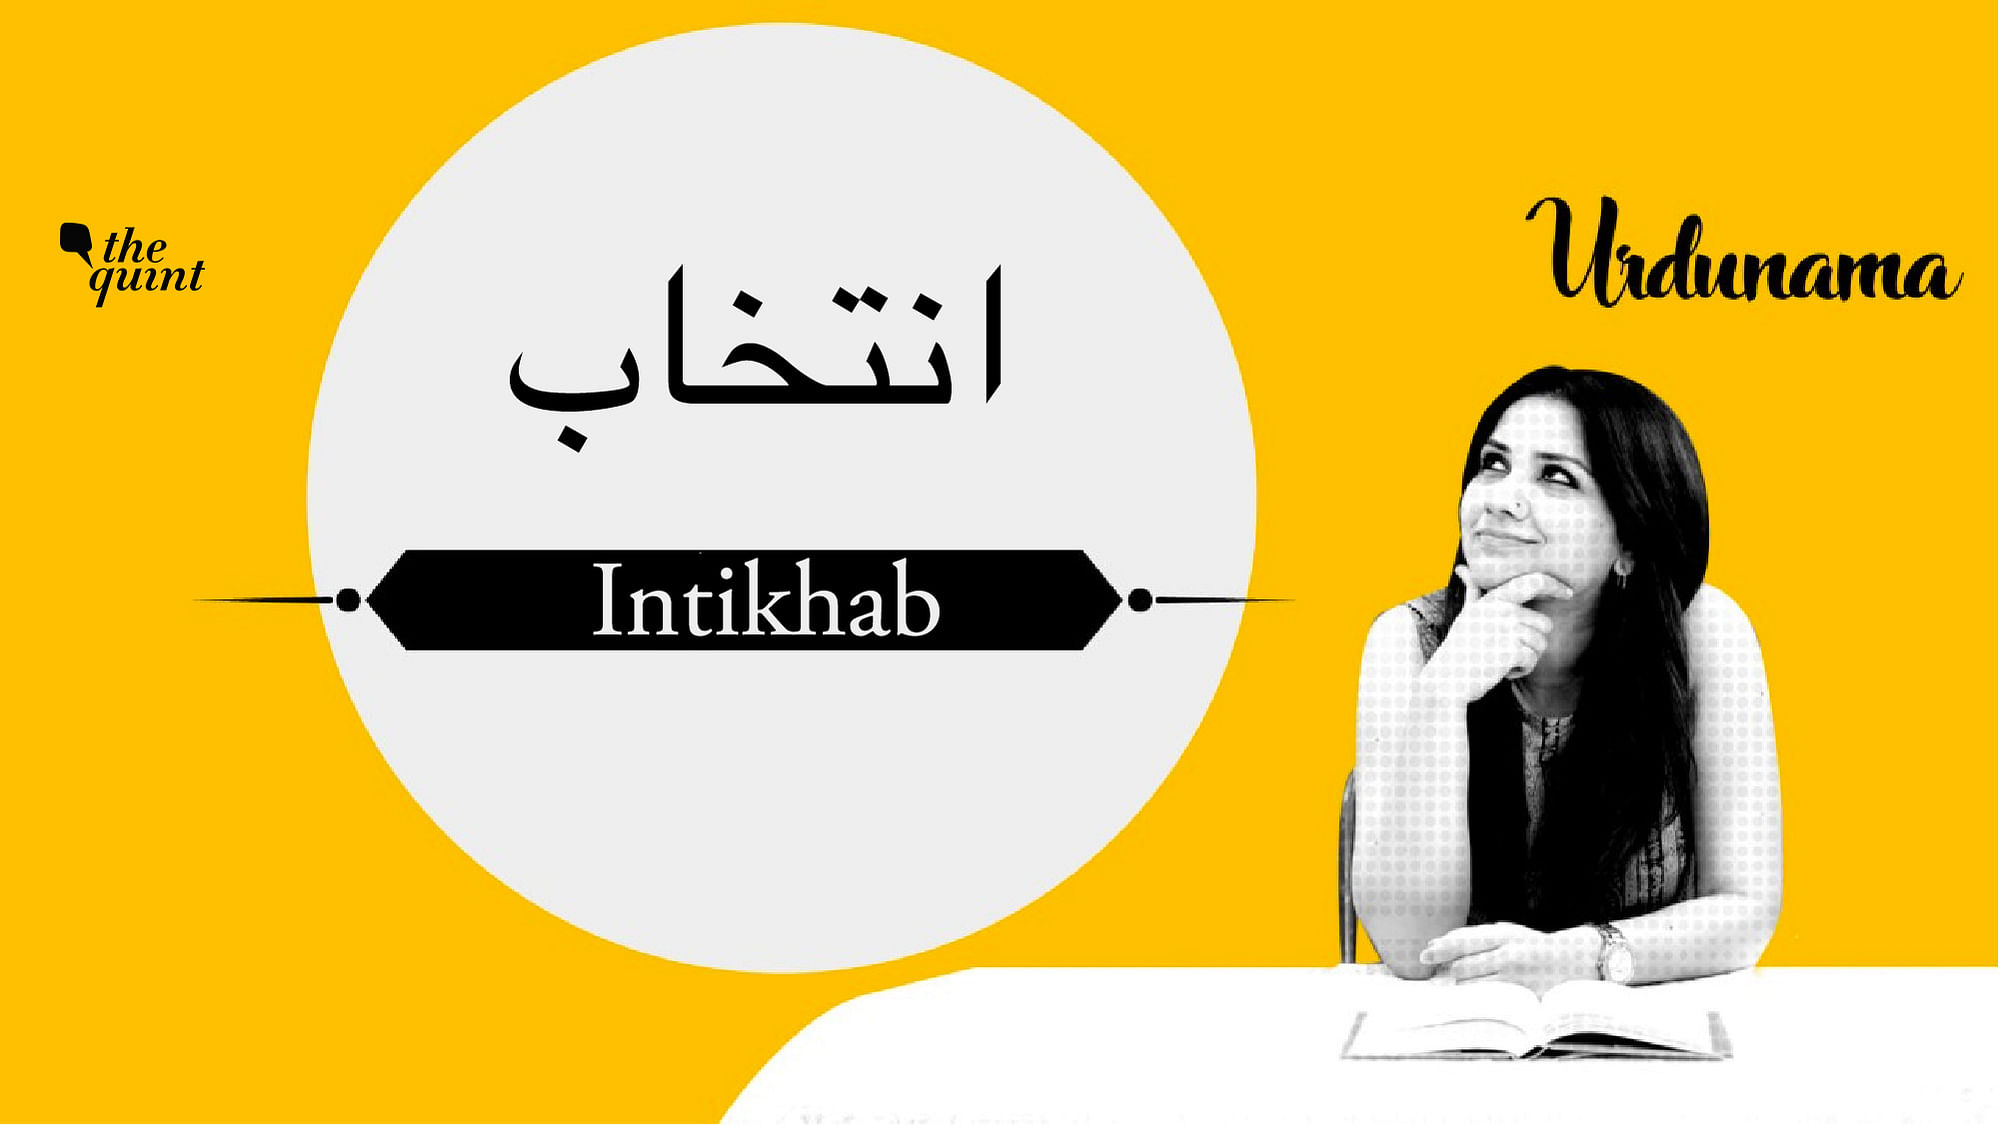 Tune in to this episode of Urdunama, where Fabeha Syed not only explains Mir’s ashar, but also explains various contexts – from political to personal – in which the word Intikhab has been used by the poets.